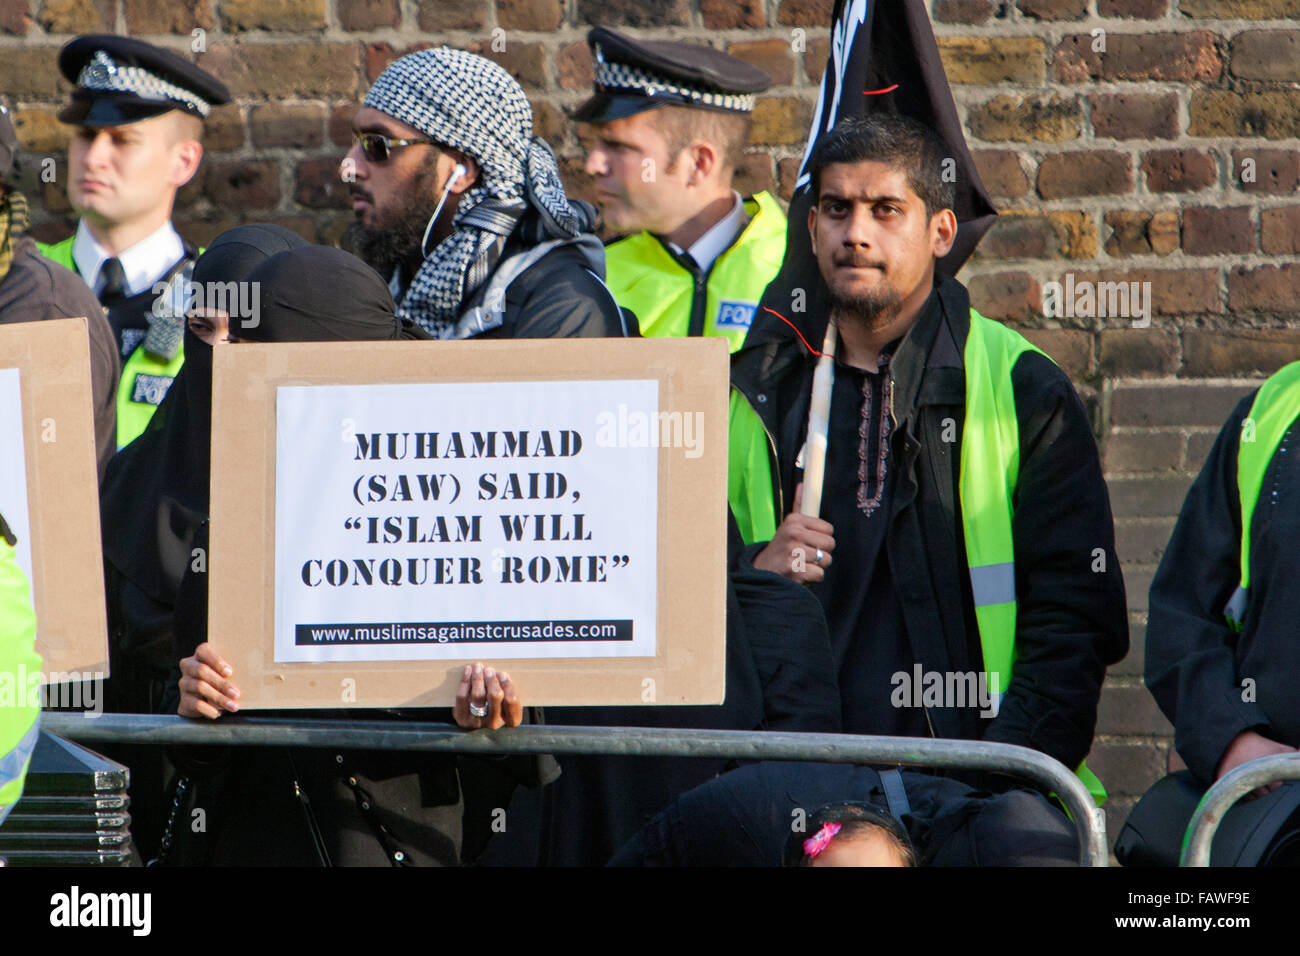 FILE PIC: London, UK. 18th September, 2010. The chief suspect in the latest propaganda video by so-called Islamic State (IS) is thought to be British man Siddhartha Dhar (Abu Rumaysah), seen here furthest right. London 18th September 2010 (File Image) Credit:  martyn wheatley/Alamy Live News Stock Photo